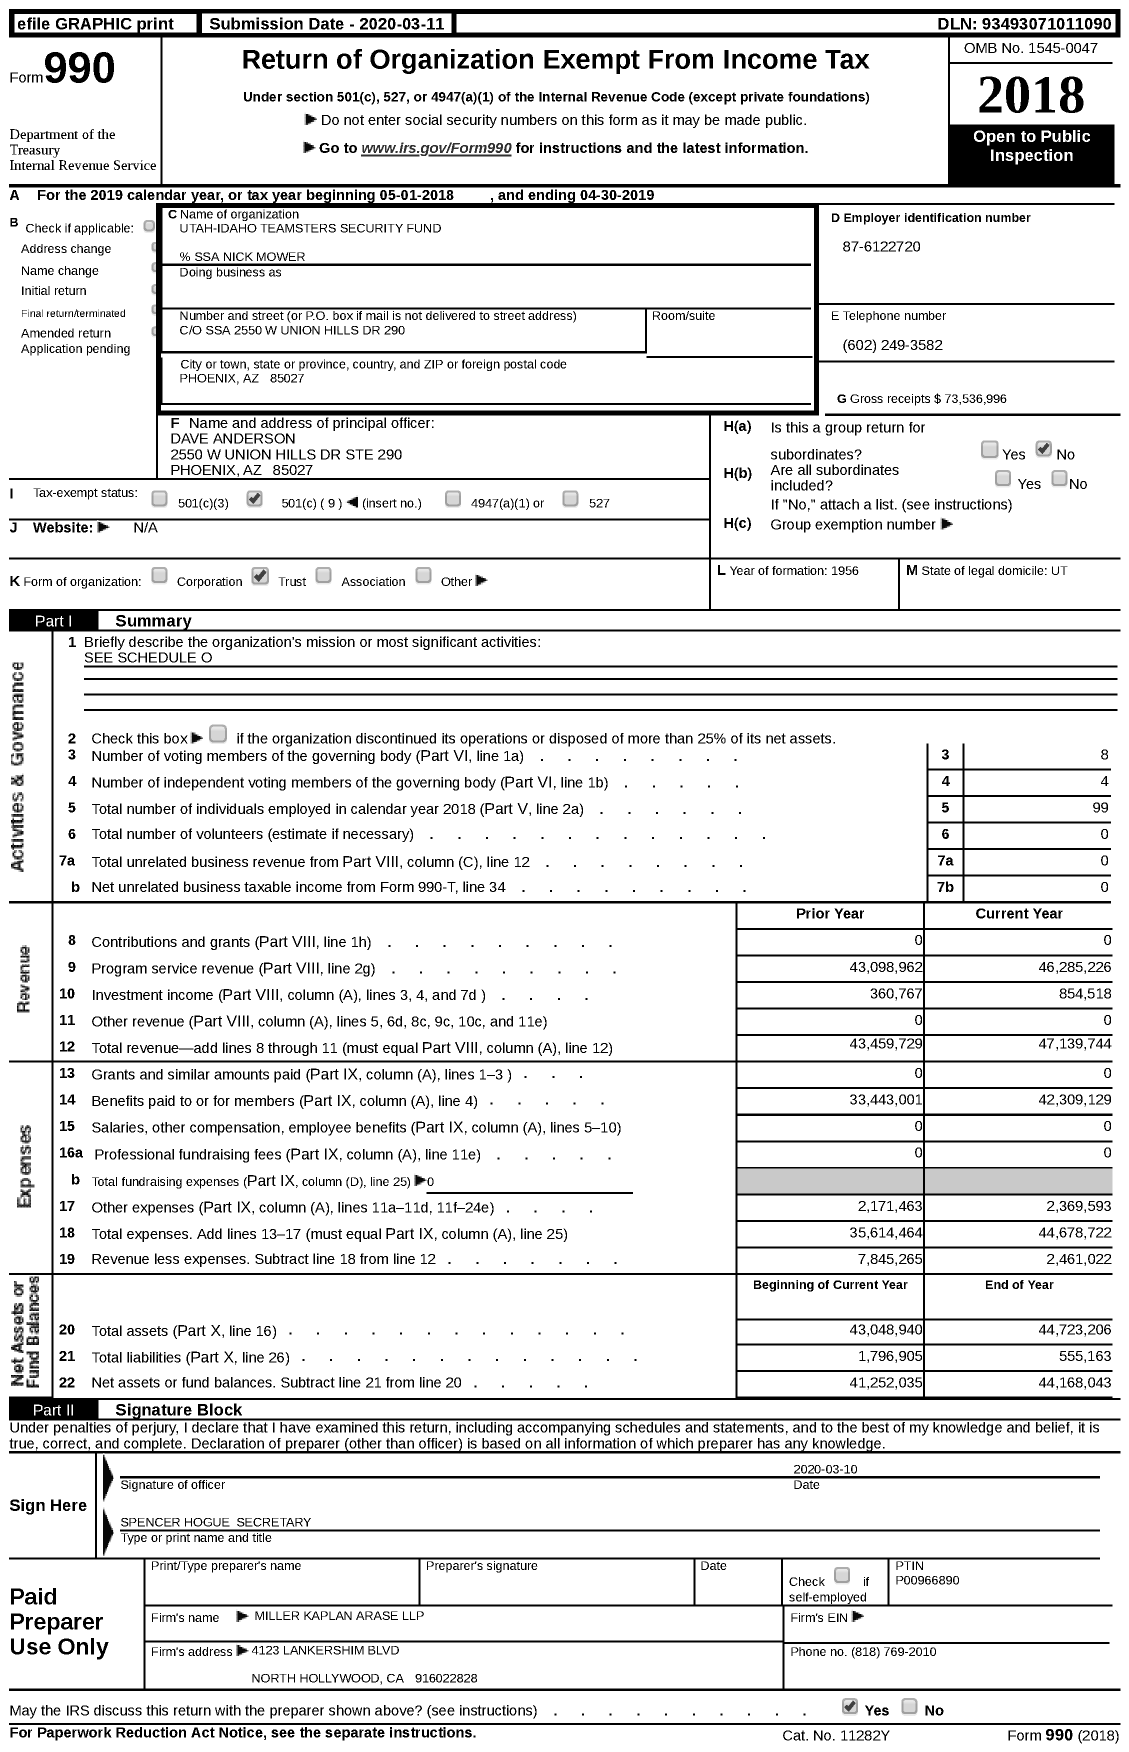 Image of first page of 2018 Form 990 for Utah-Idaho Teamsters Security Fund